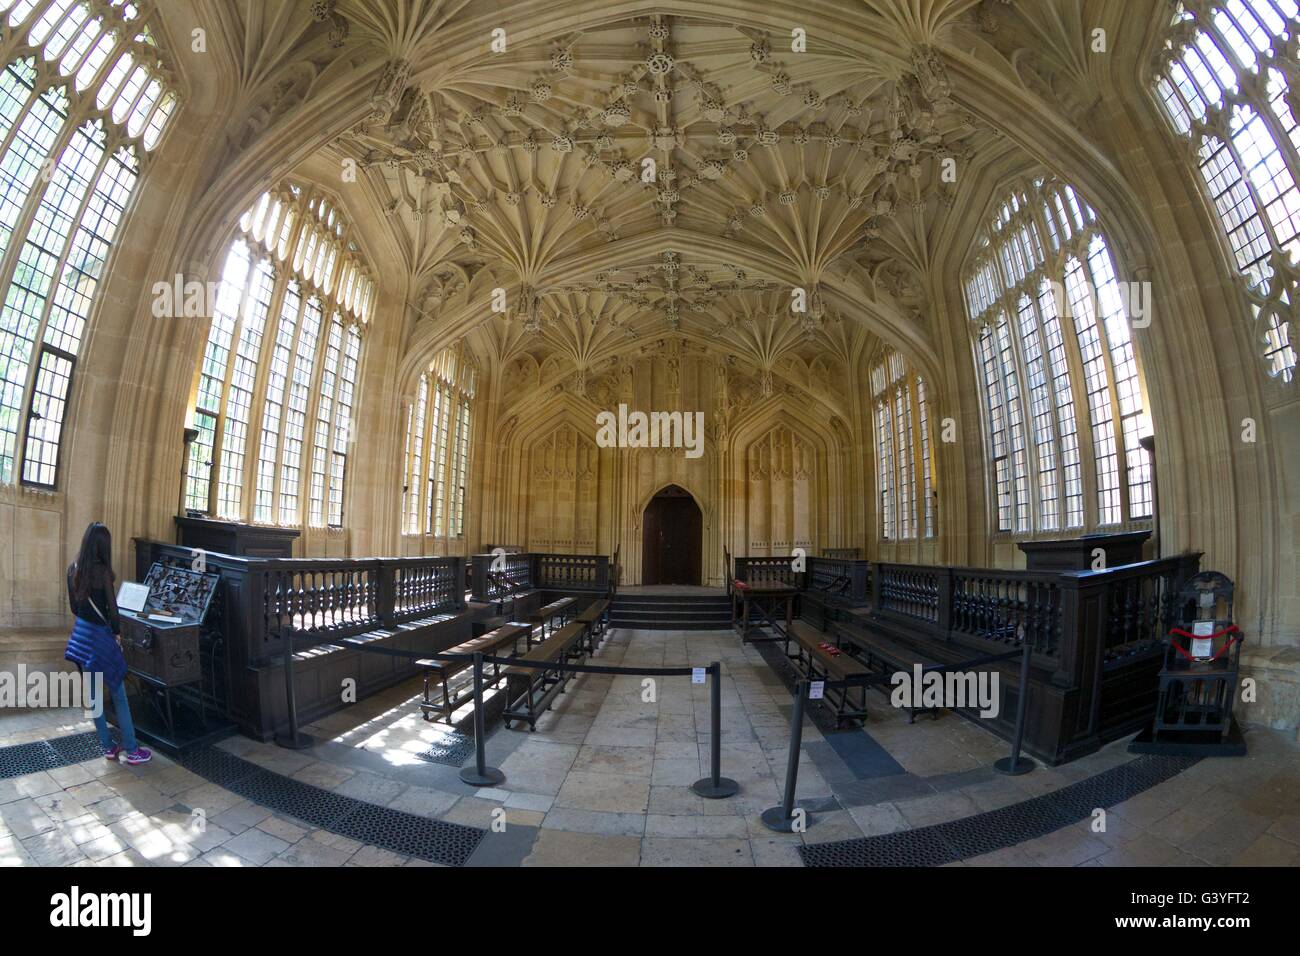 Divinity School with vaulted ceiling, Bodleian Library, Oxford, Oxfordshire, England, United Kingdom, Europe Stock Photo